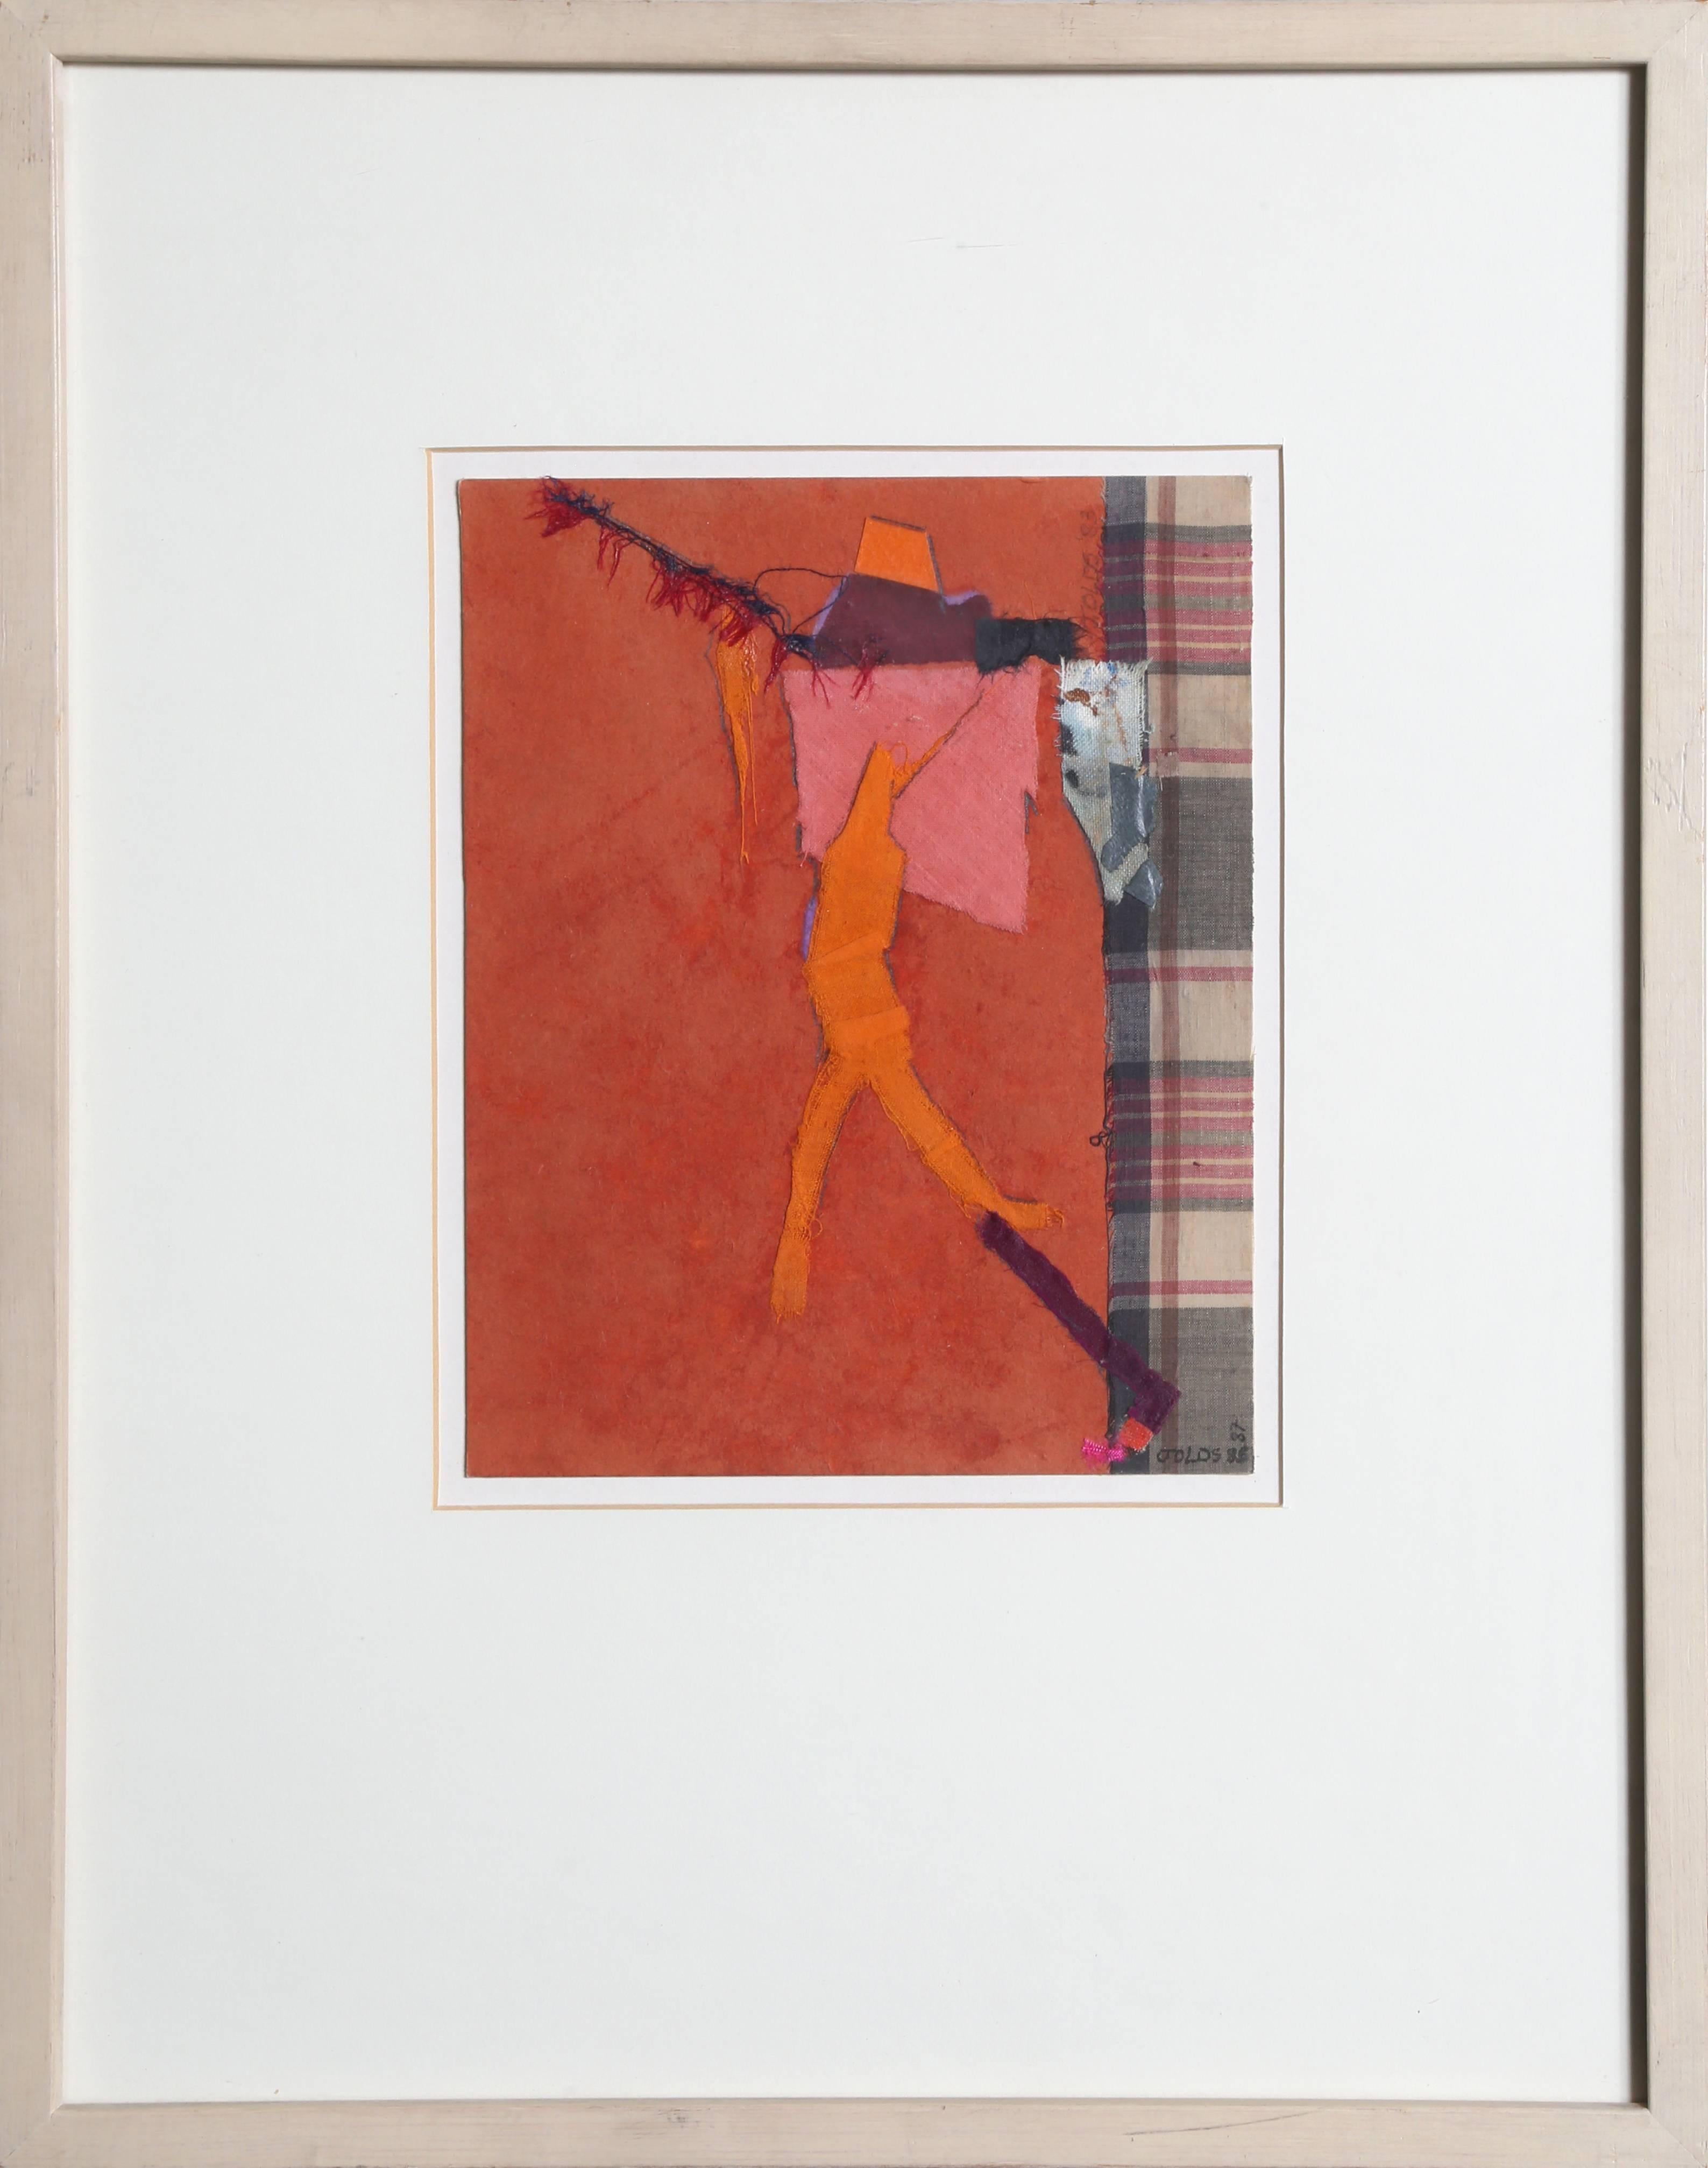 "Reaching No. 2", Collage with Fabric and Paper, 1985 - Mixed Media Art by Jean Olds